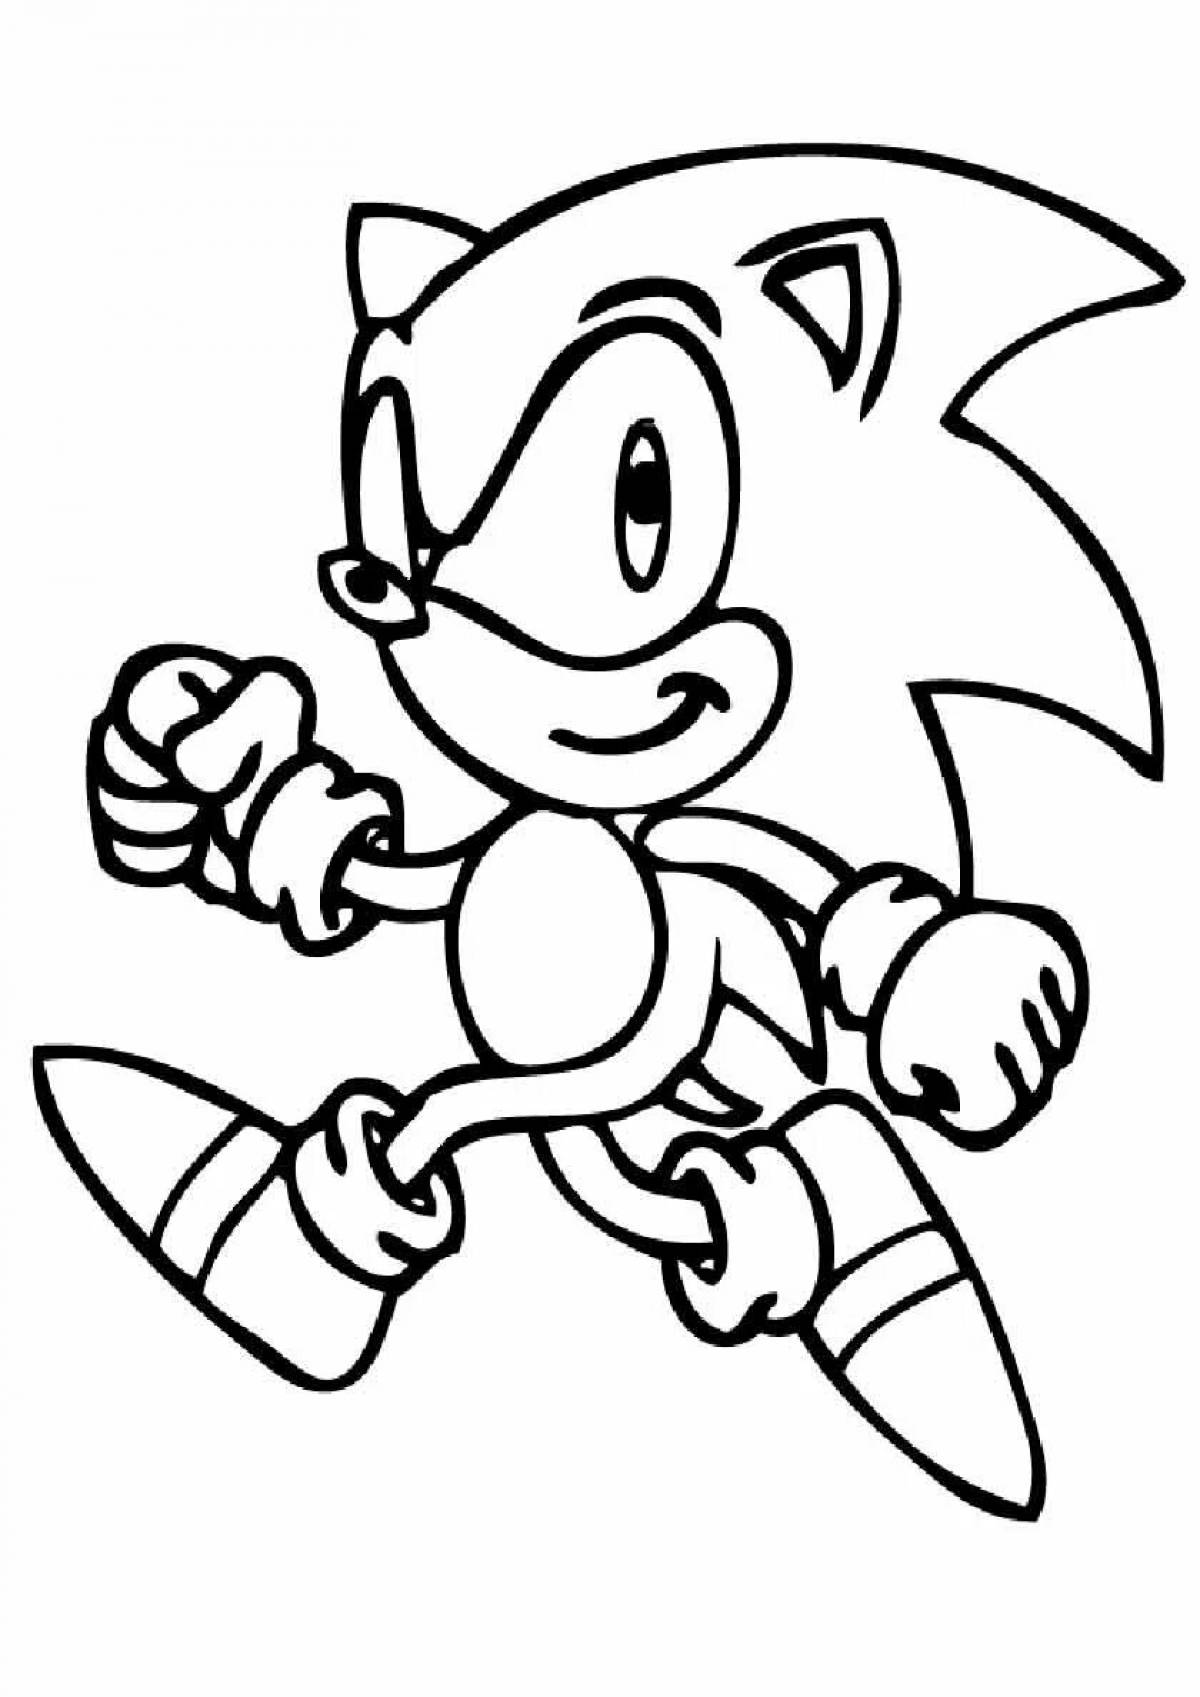 Tempting sonic the hedgehog coloring book